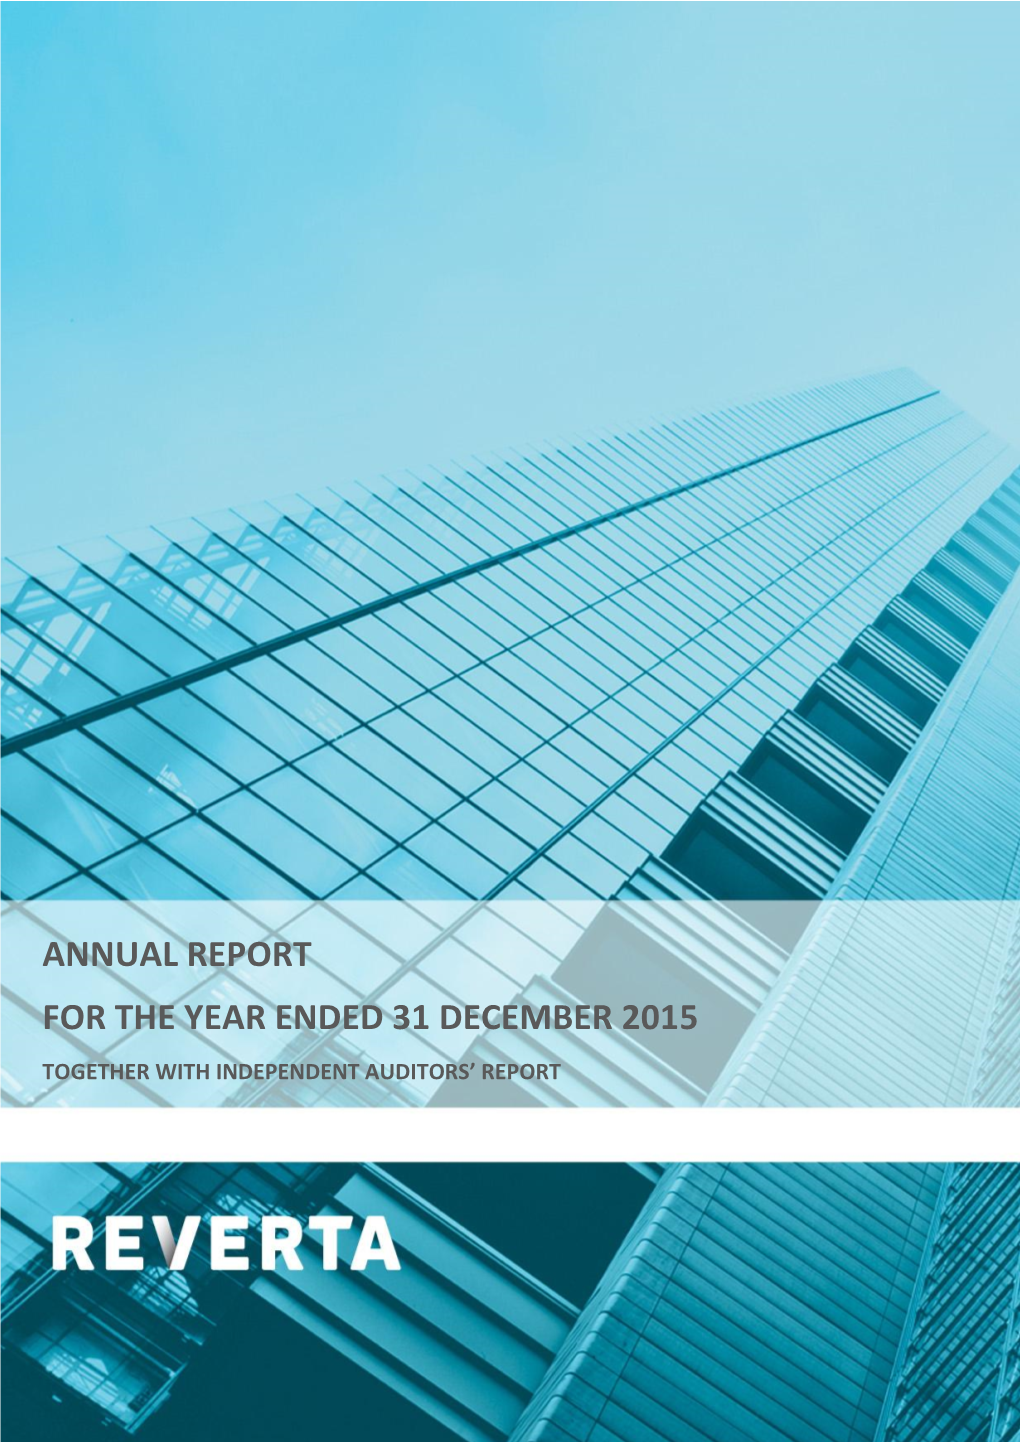 Annual Report for the Year Ended 31 December 2015